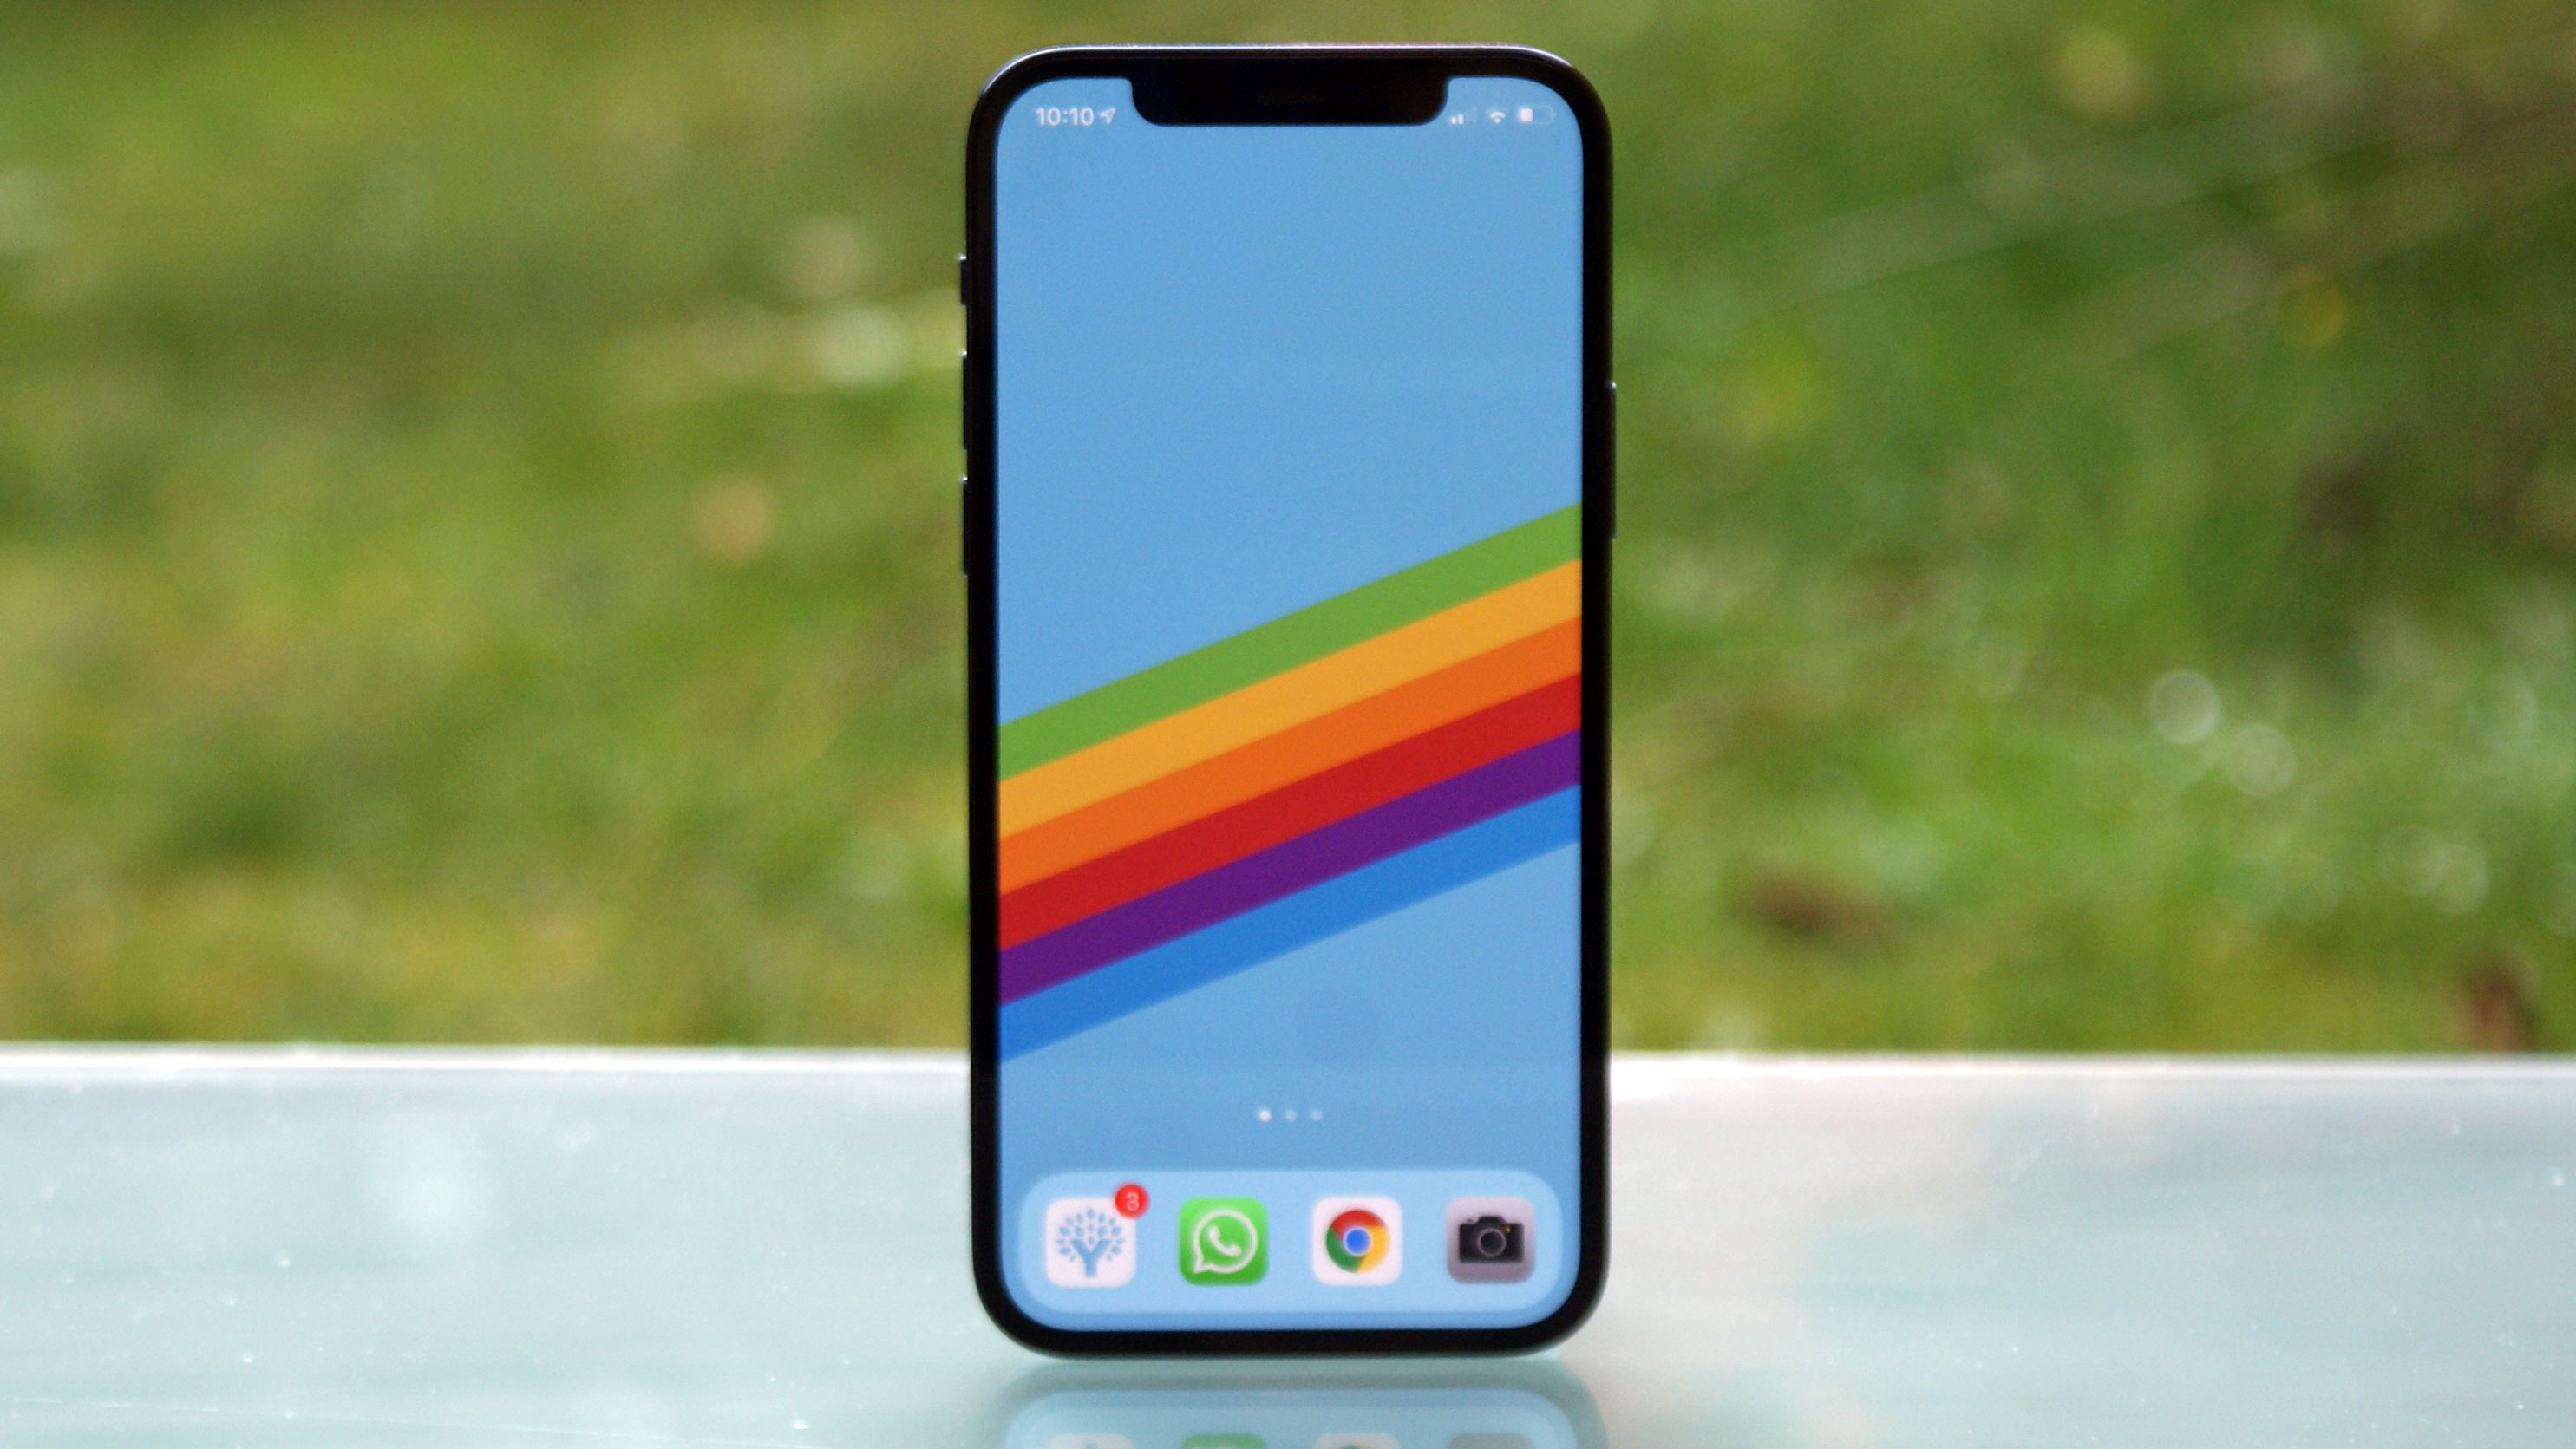 The iPhone 13 Pro may look similar to the iPhone 12 Pro